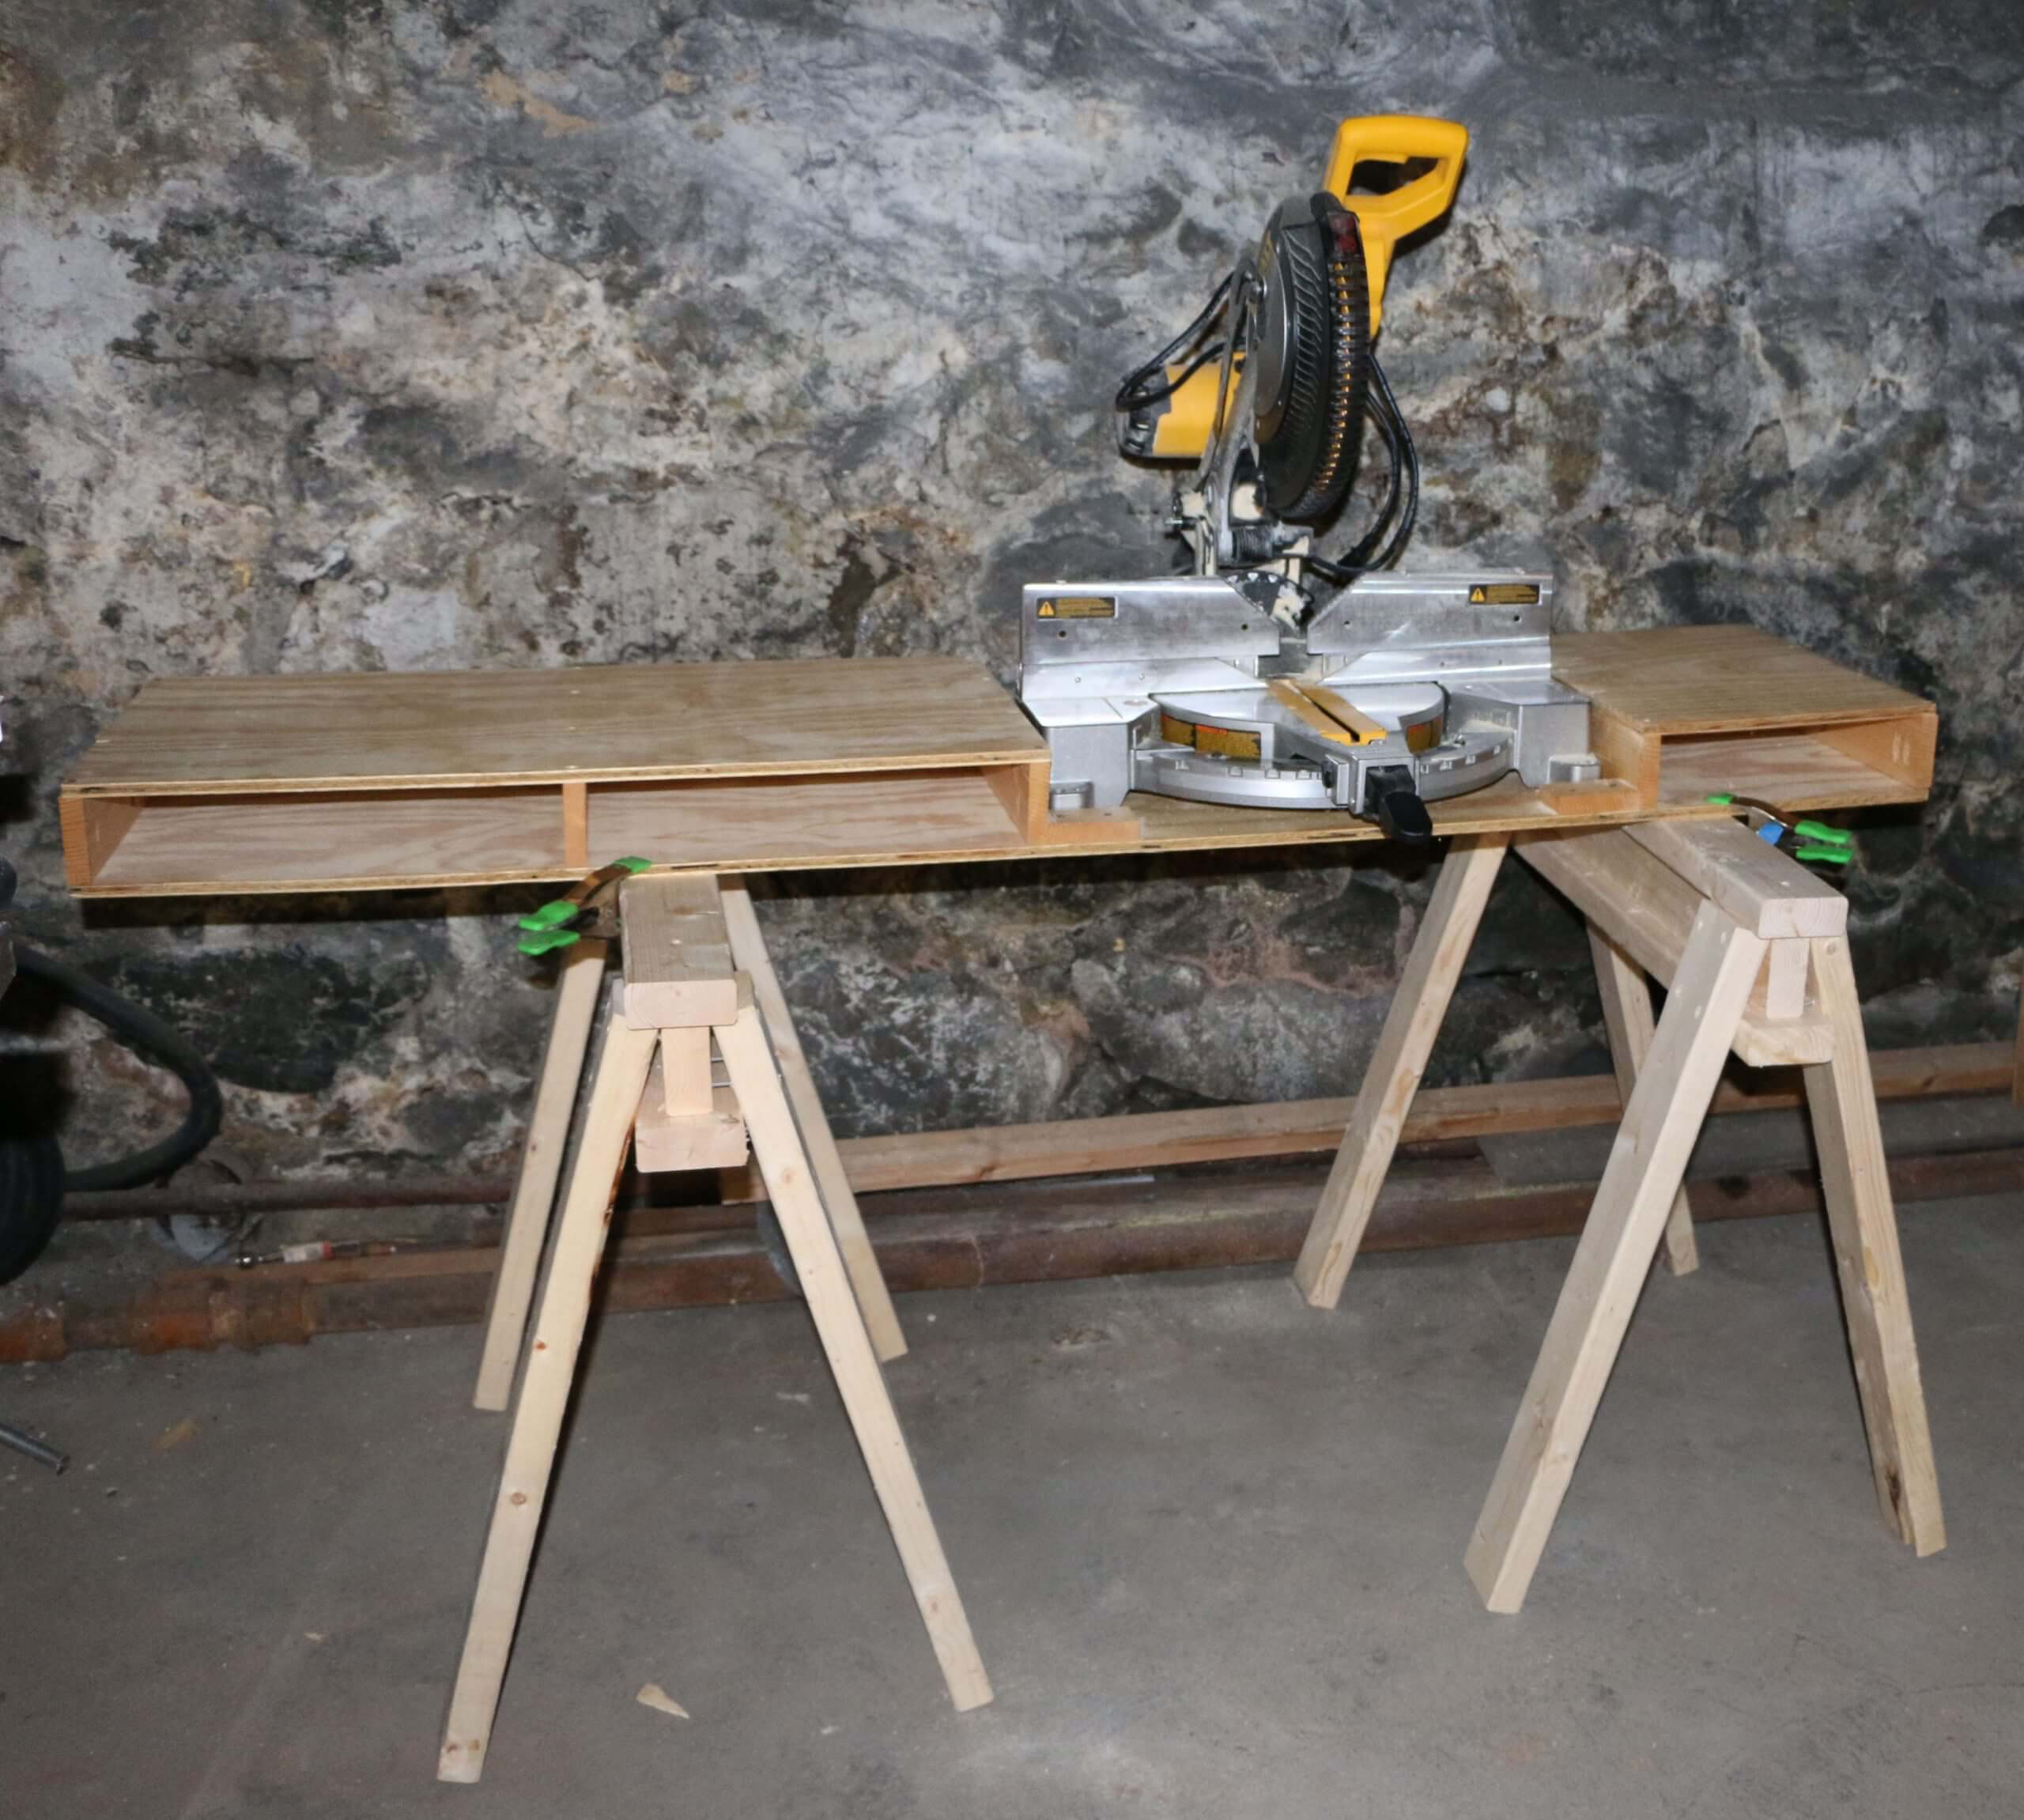 How To Make A Portable Miter Saw Table Jeffs Diy Projects